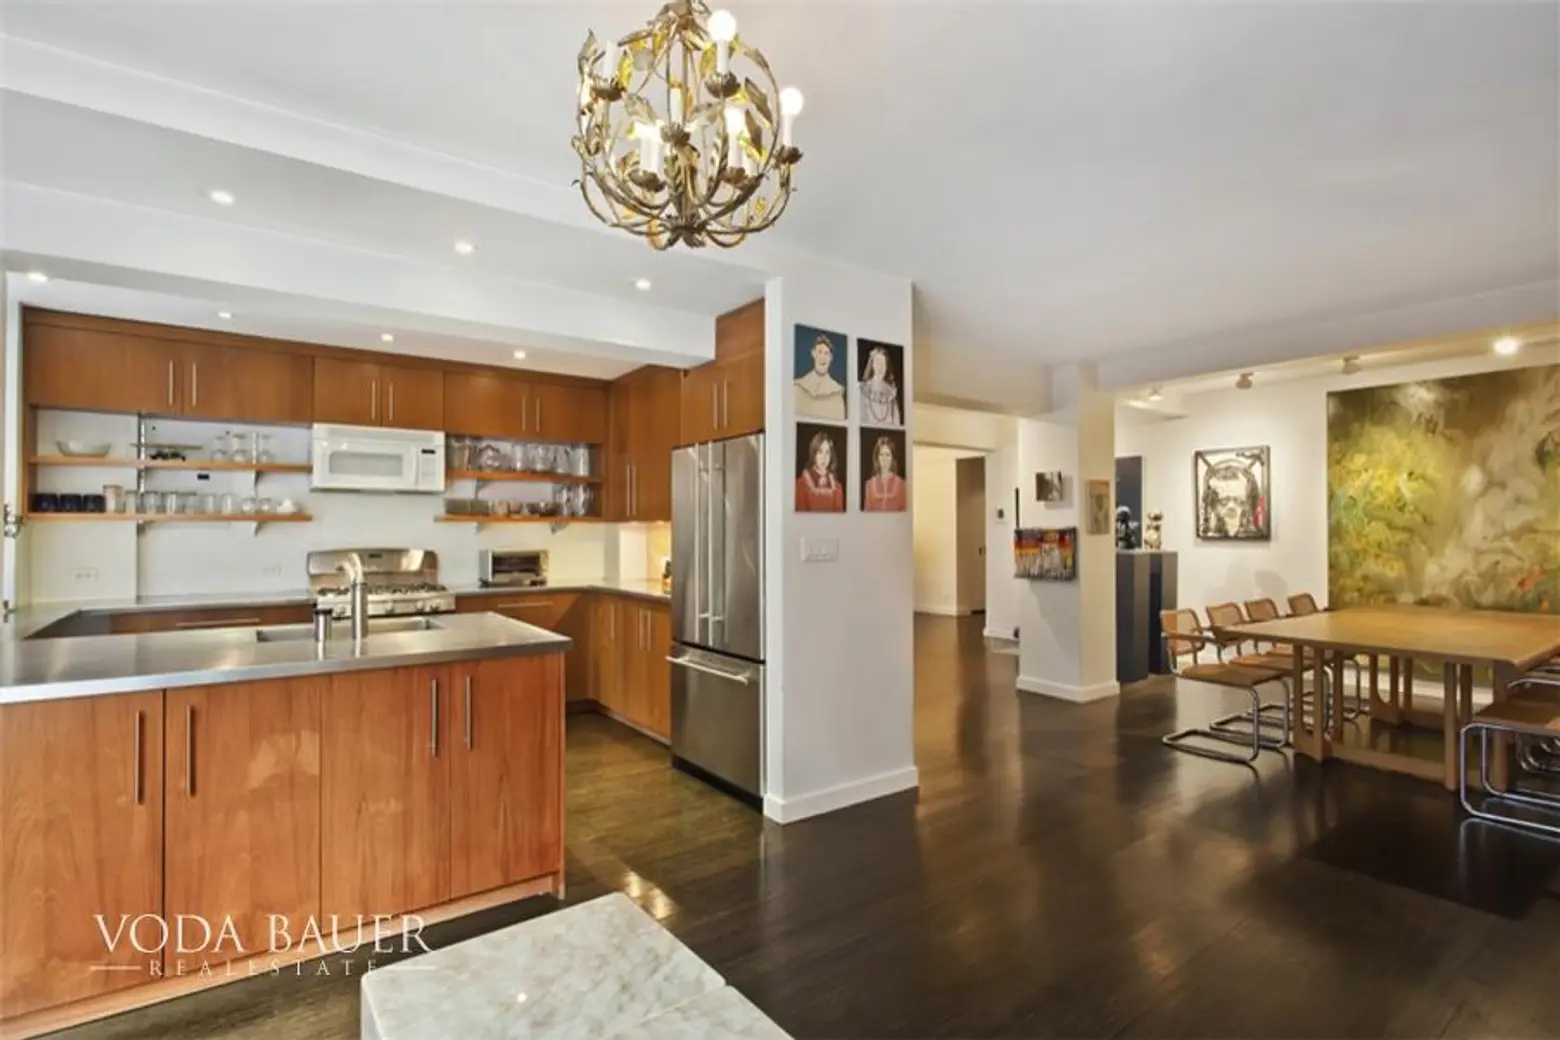 65 East 76th Street #3CDE, Voda Bauer listing, apartment gallery